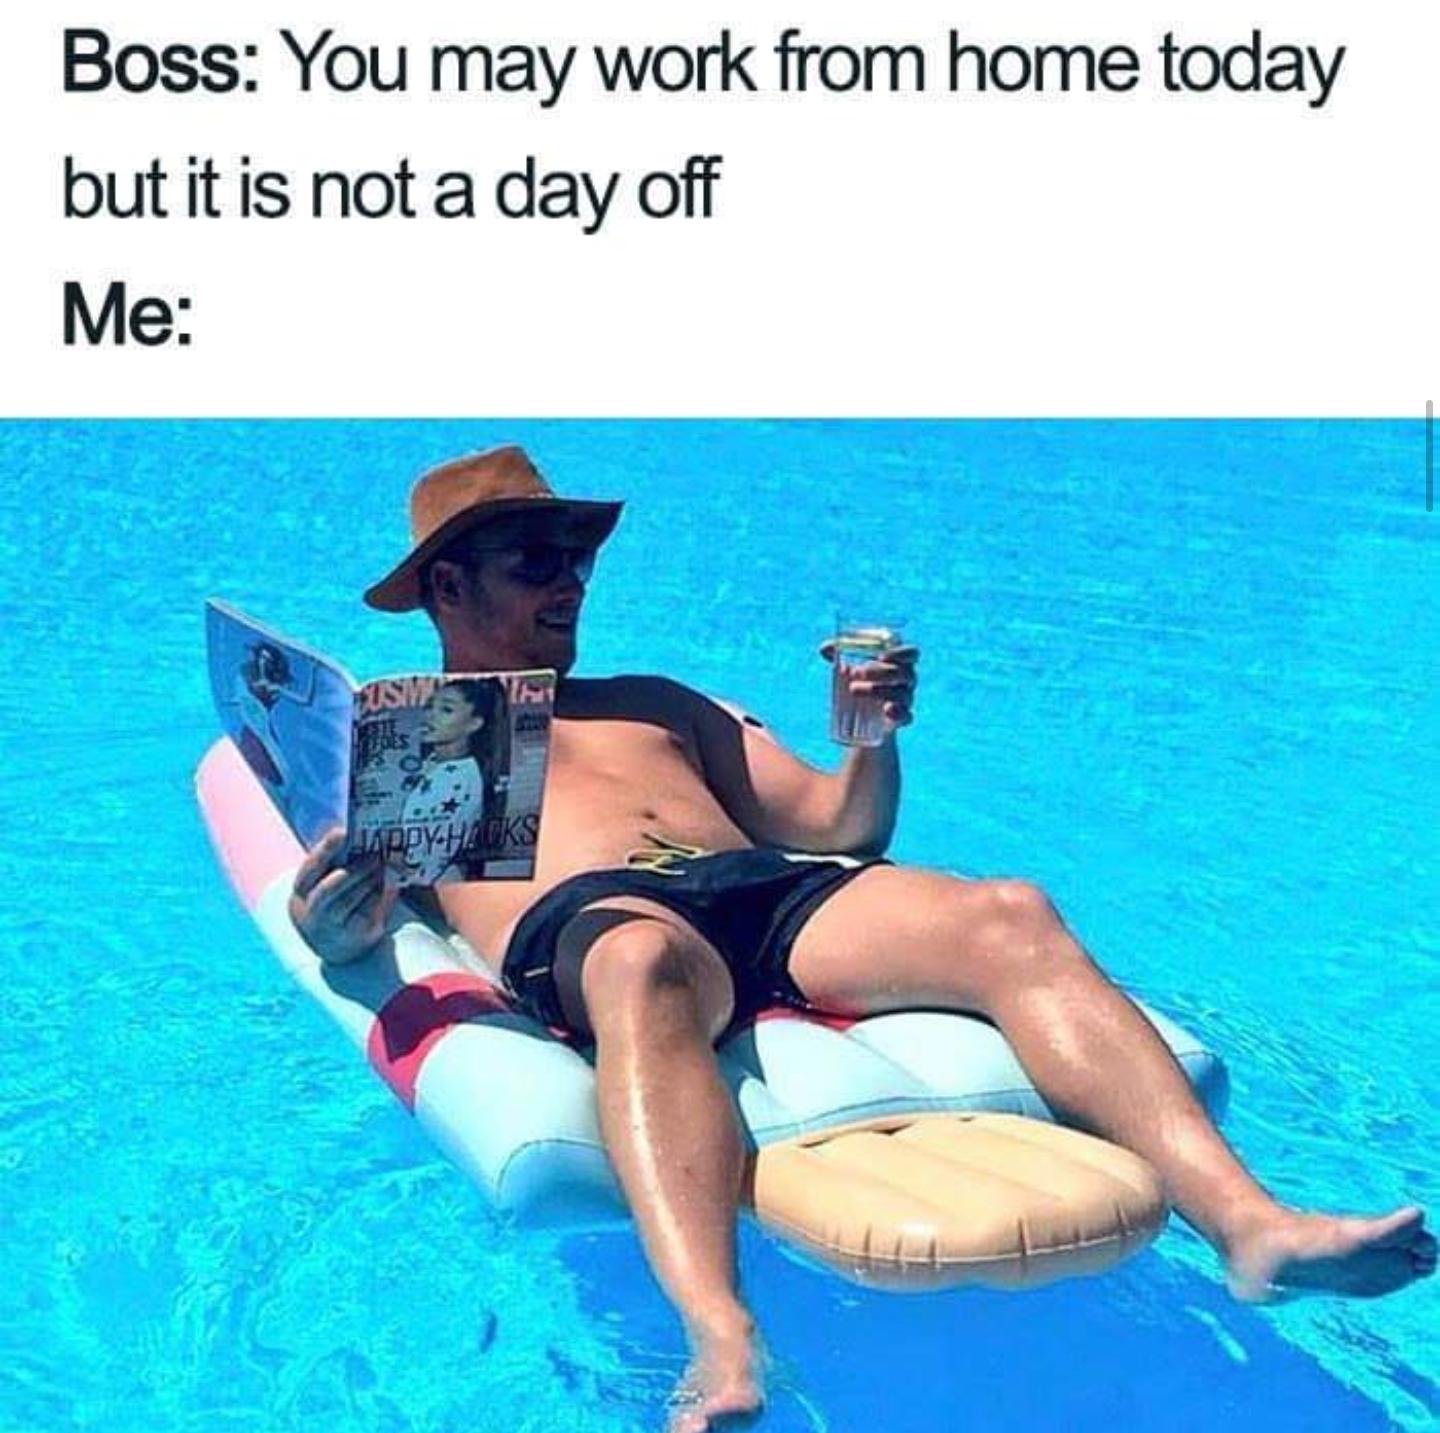 boss you can work from home but - Boss You may work from home today but it is not a day off Me . s